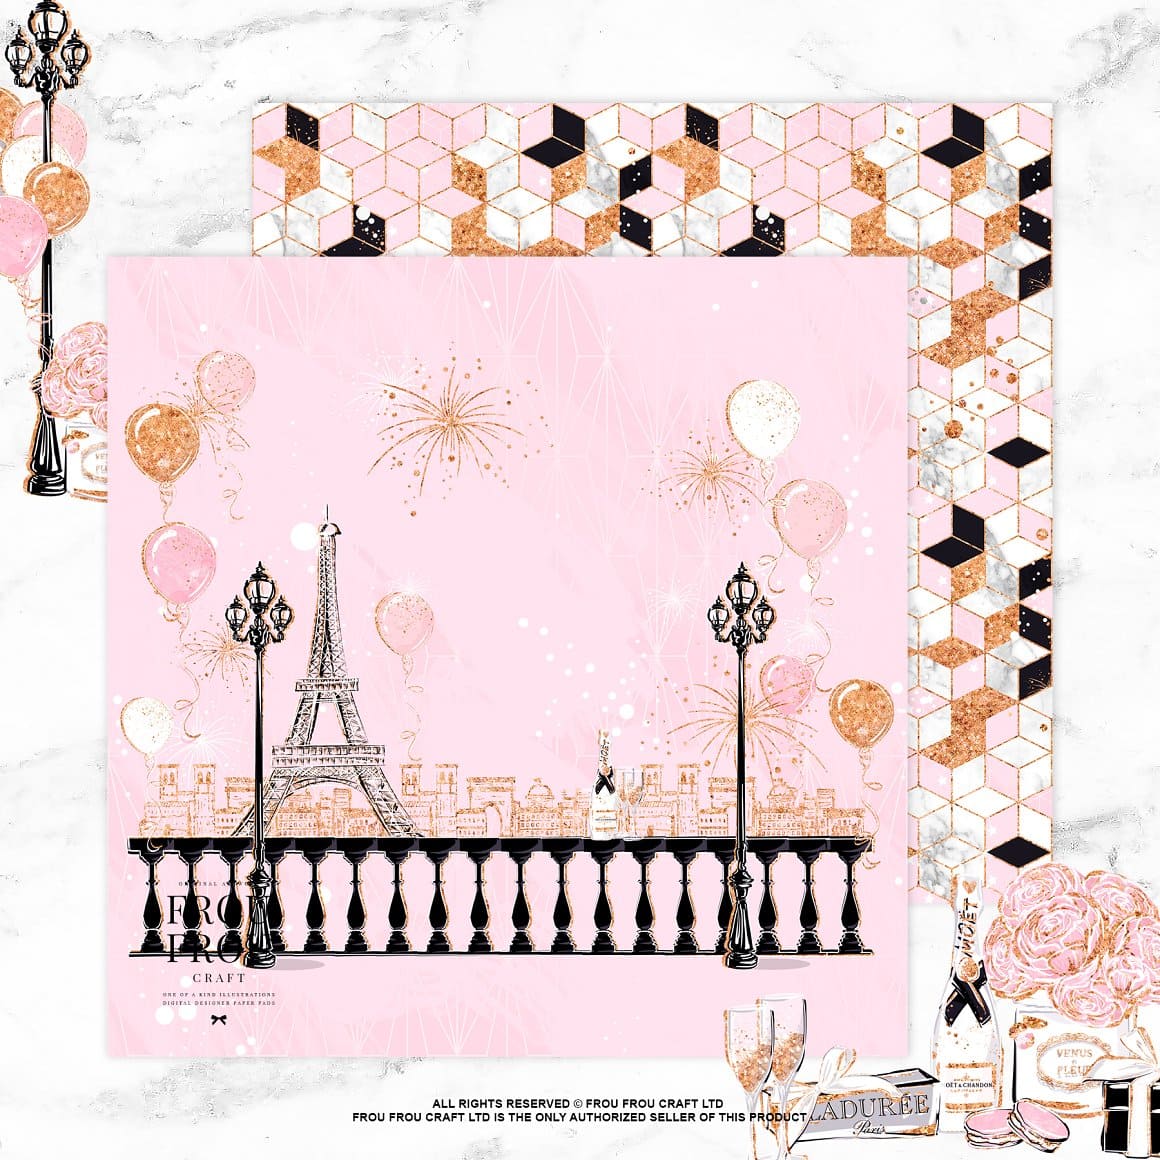 The embankment in Paris is depicted on a pink background.